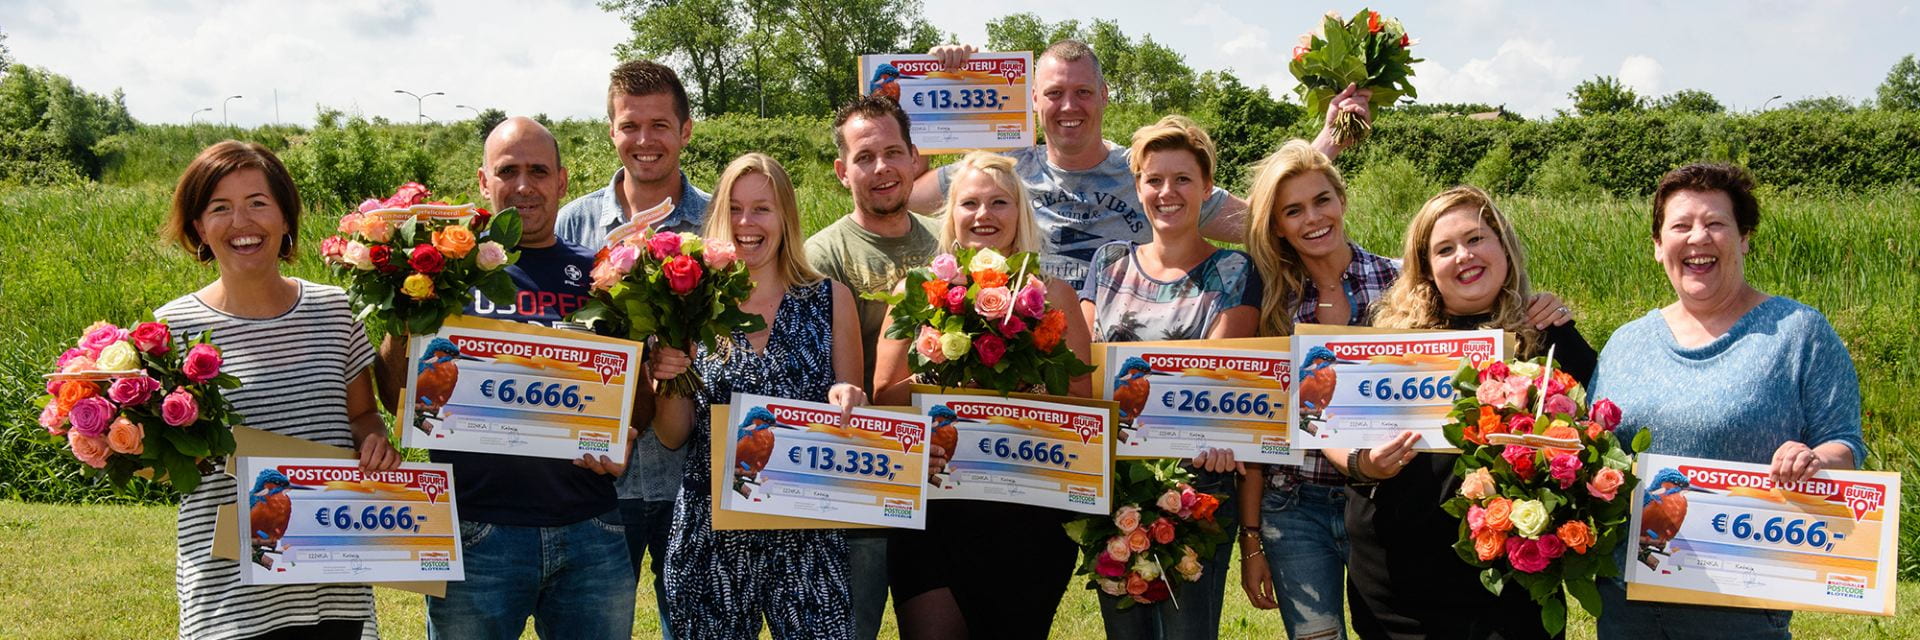 Winners of the National Postcode Lottery, courtesy of Novamedia and Roy Beusker.